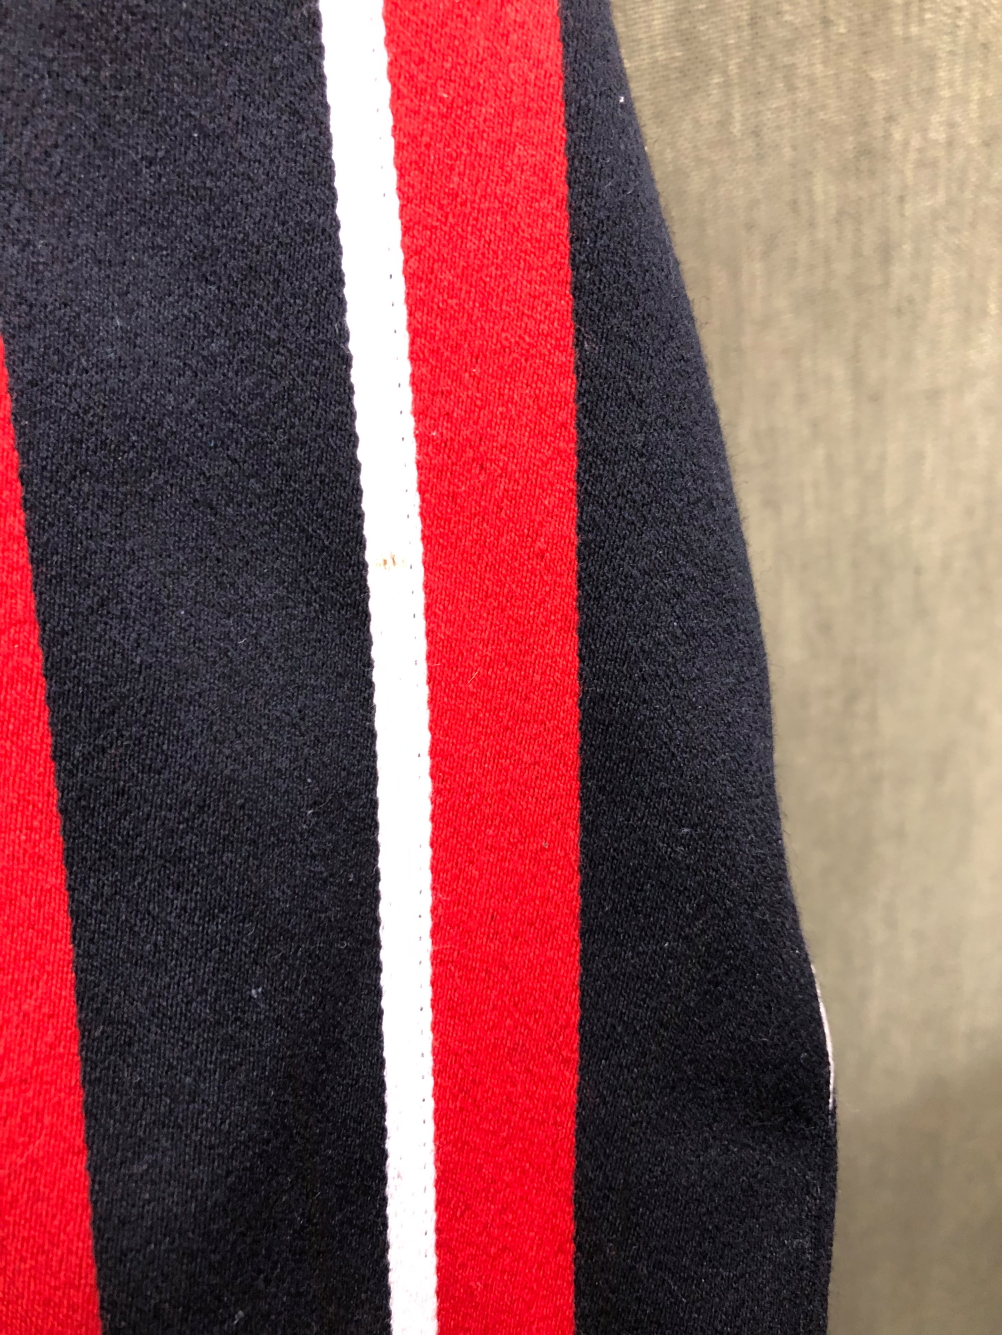 BLAZER. A MANS RED, BLACK AND WHITE BOATING BLAZER WITH ARMORIAL ON THE POCKET. PIT TO PIT 46cms, - Image 6 of 10